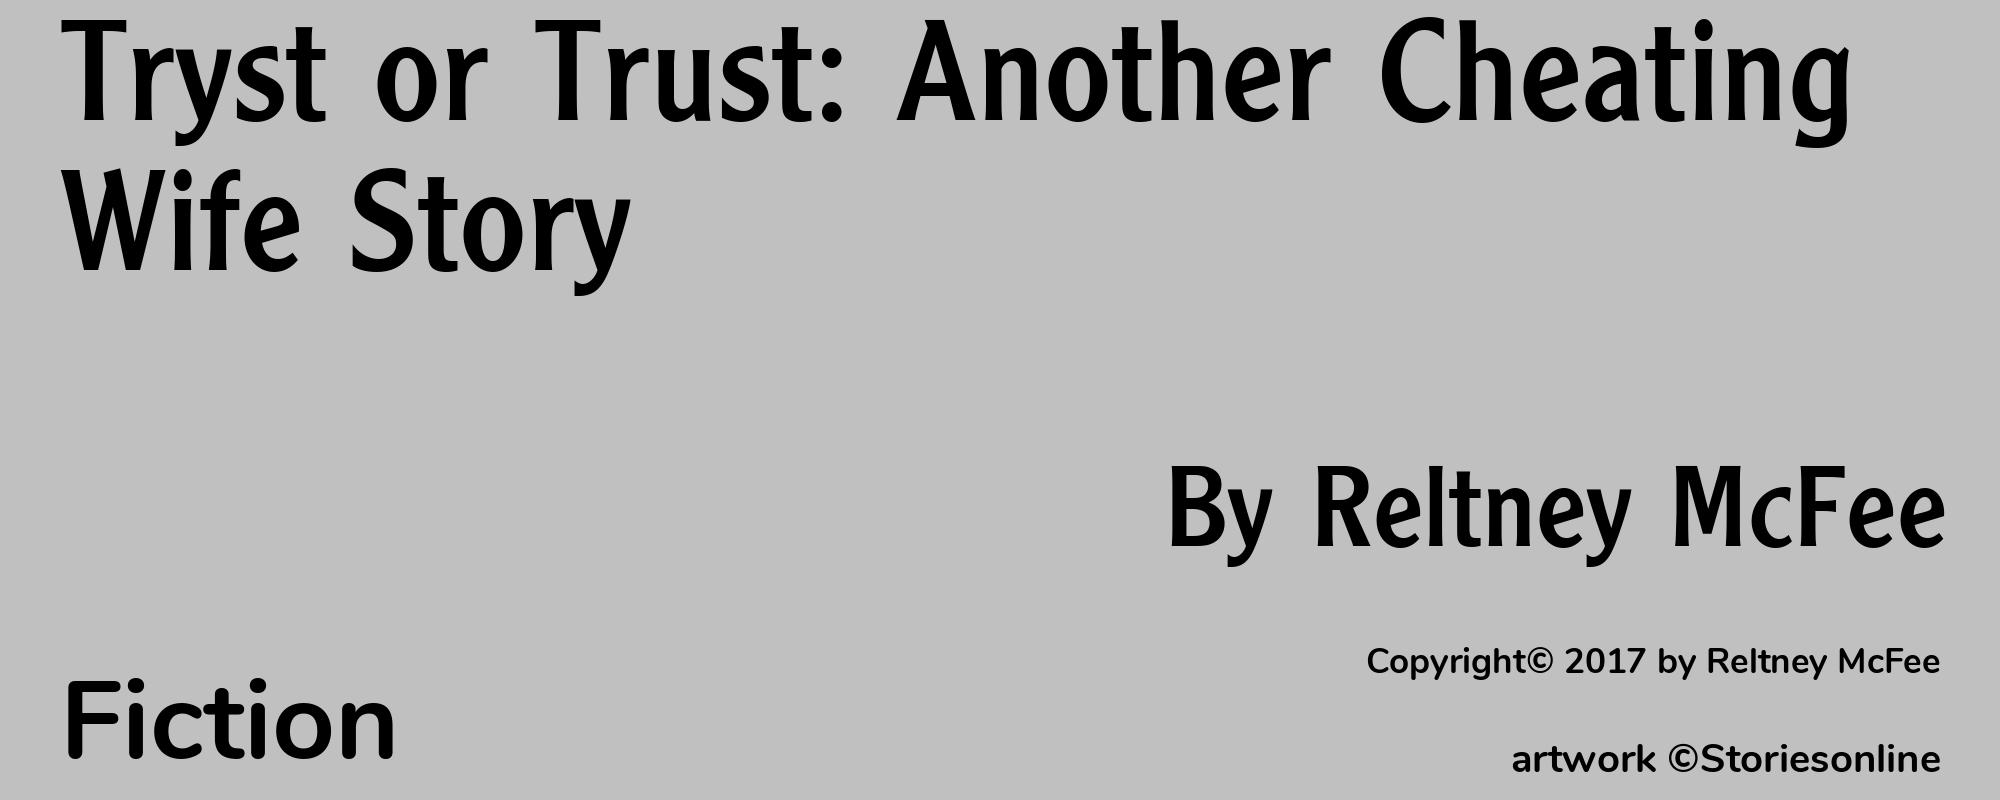 Tryst or Trust: Another Cheating Wife Story - Cover